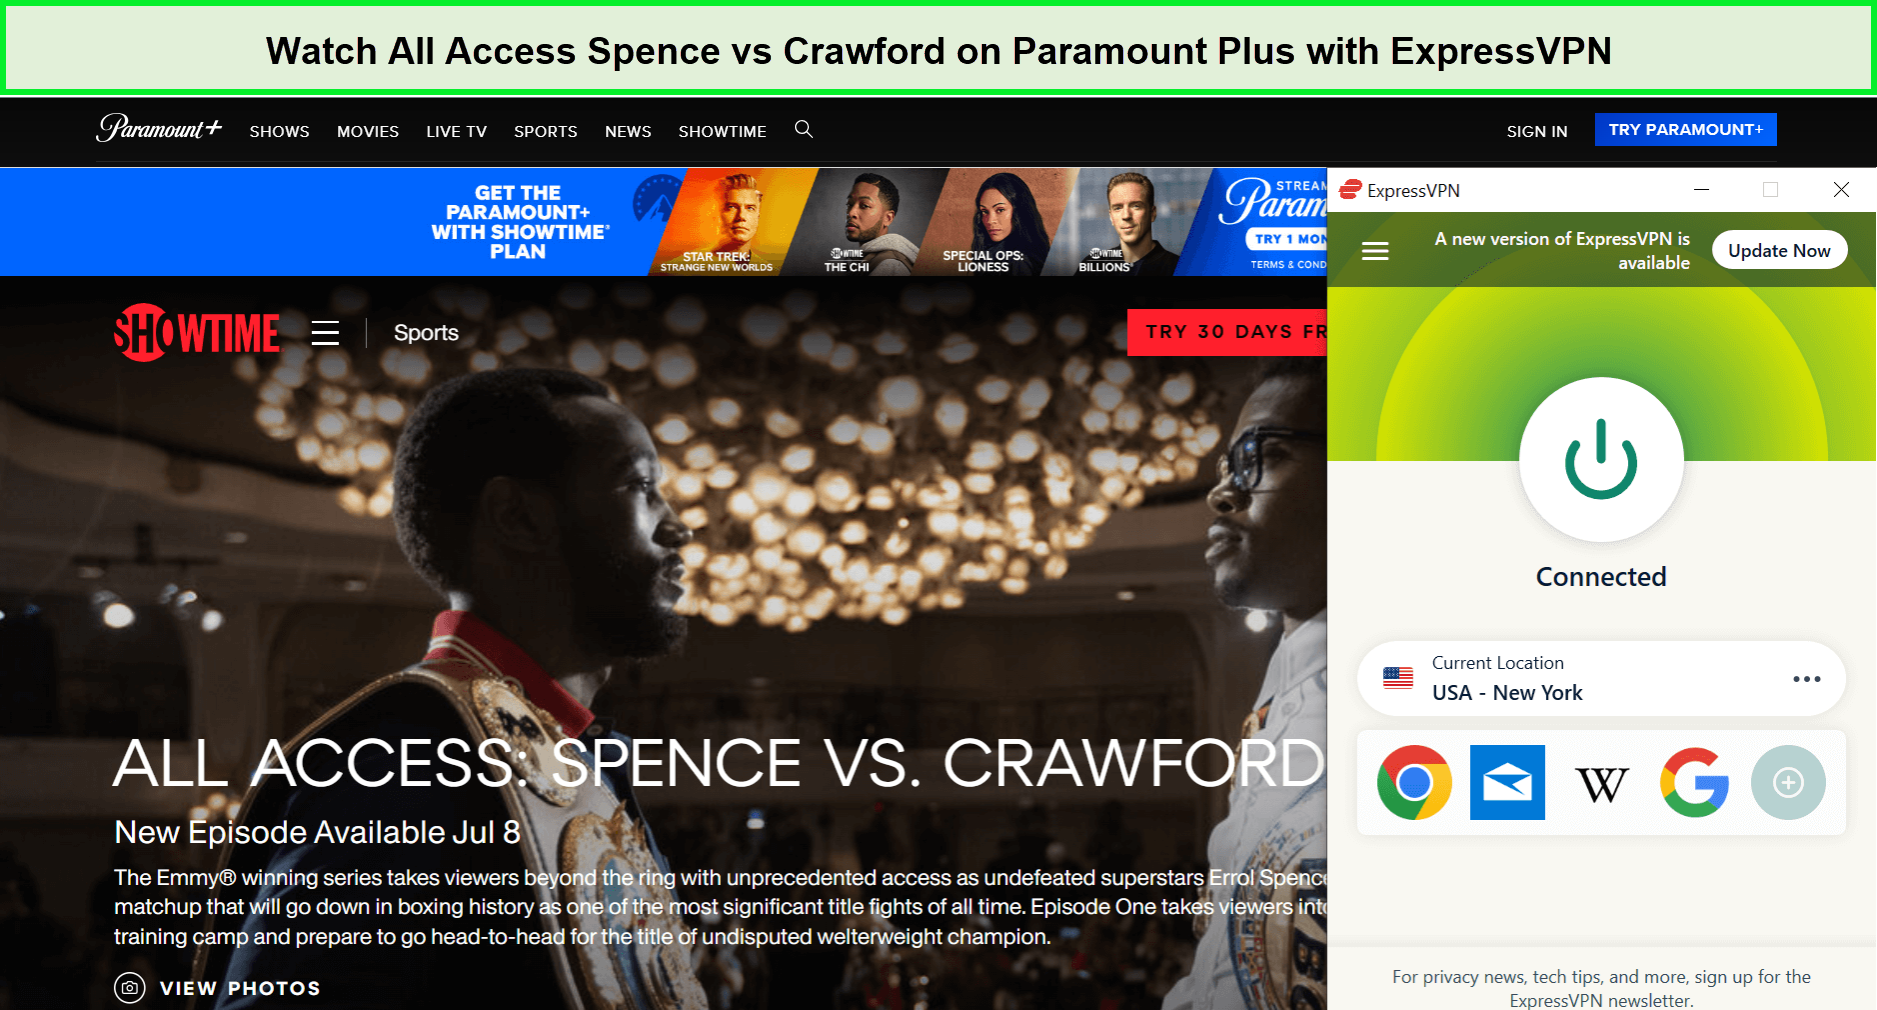 Watch-All-Access-Spence-vs-Crawford-in-Singapore-on-Paramount-Plus-with-ExpressVPN